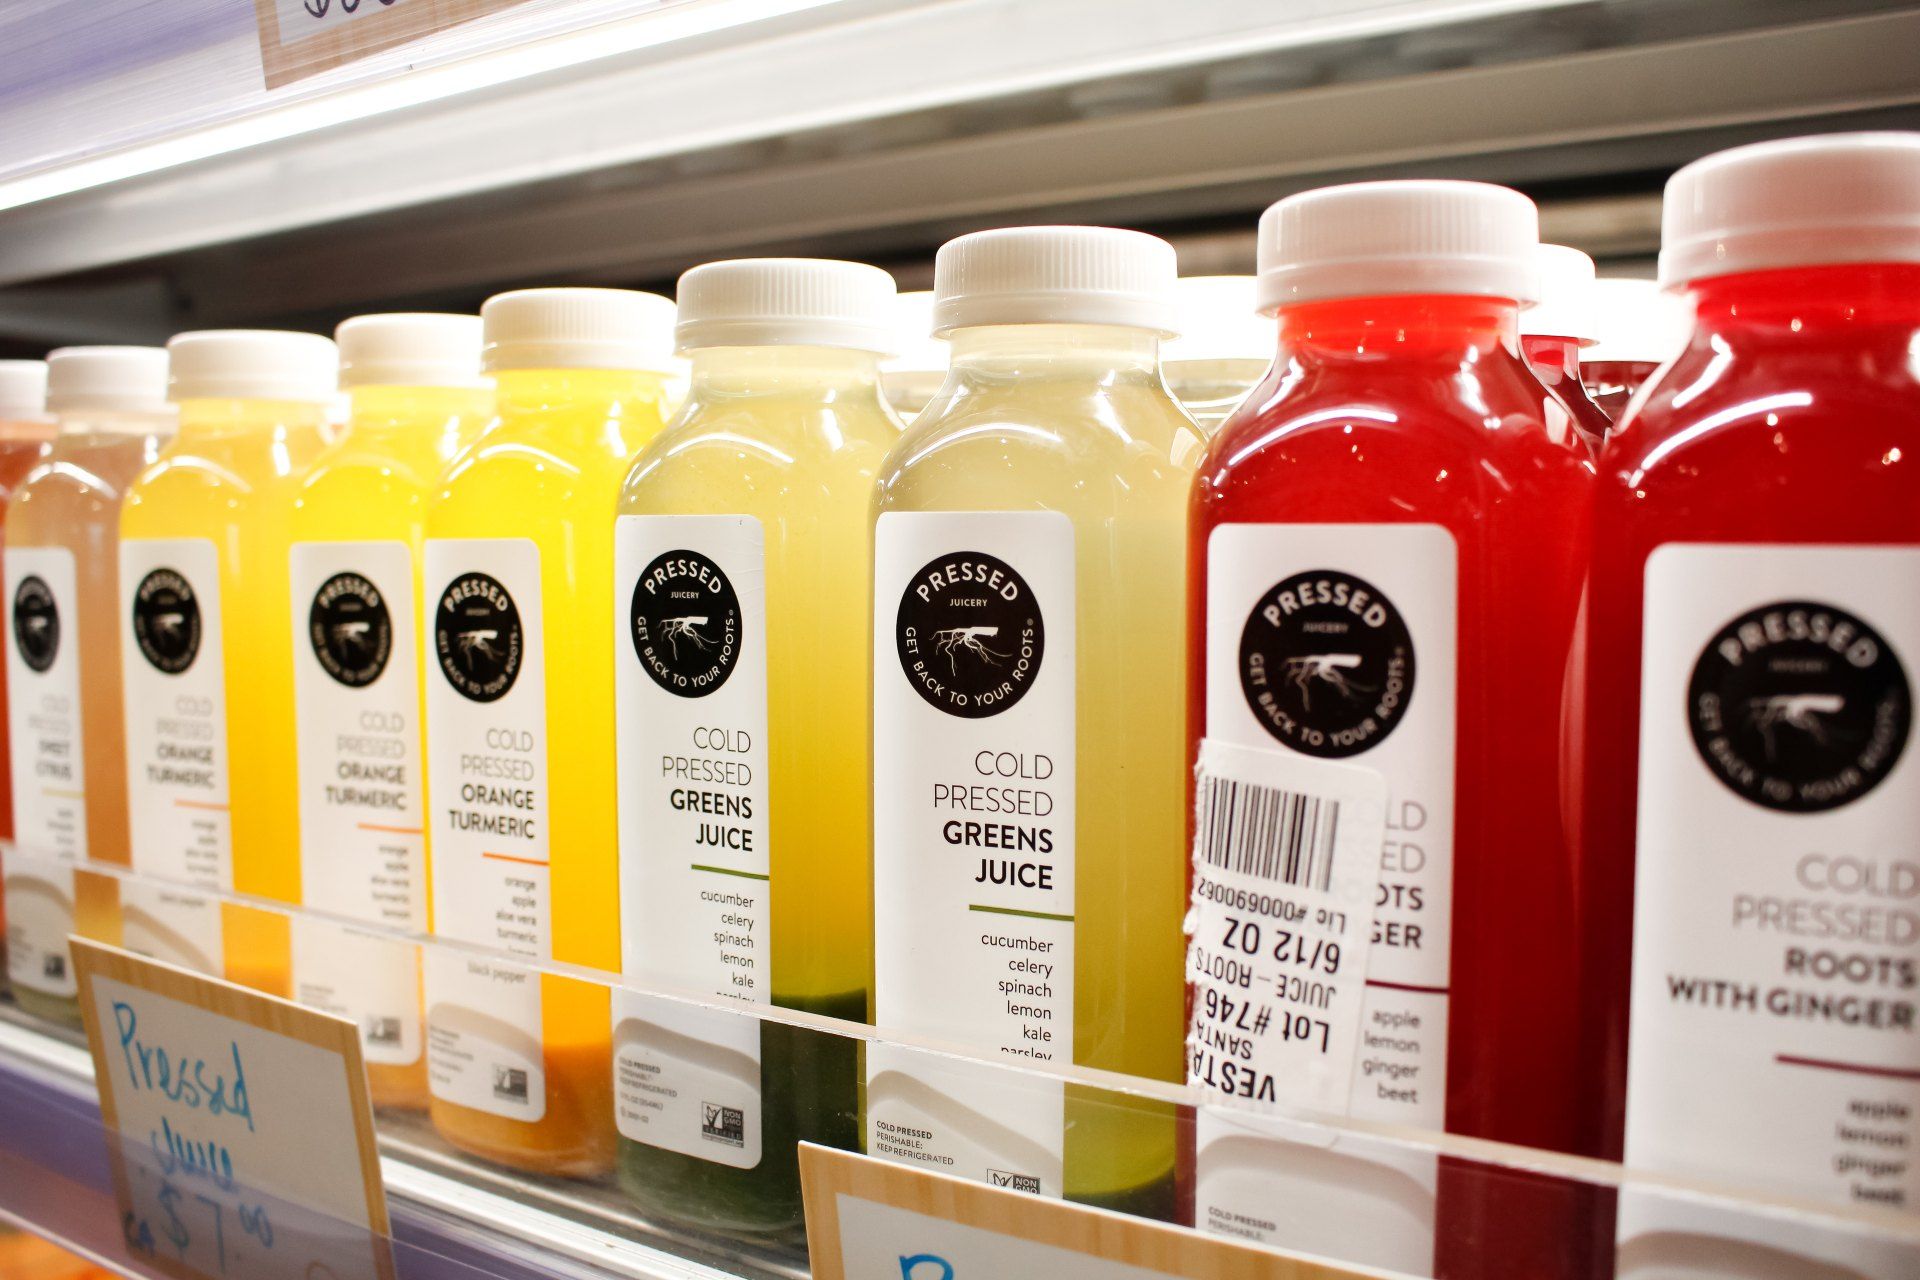 Pressed Juicery Green Juices are seen in the refrigerated section of a store